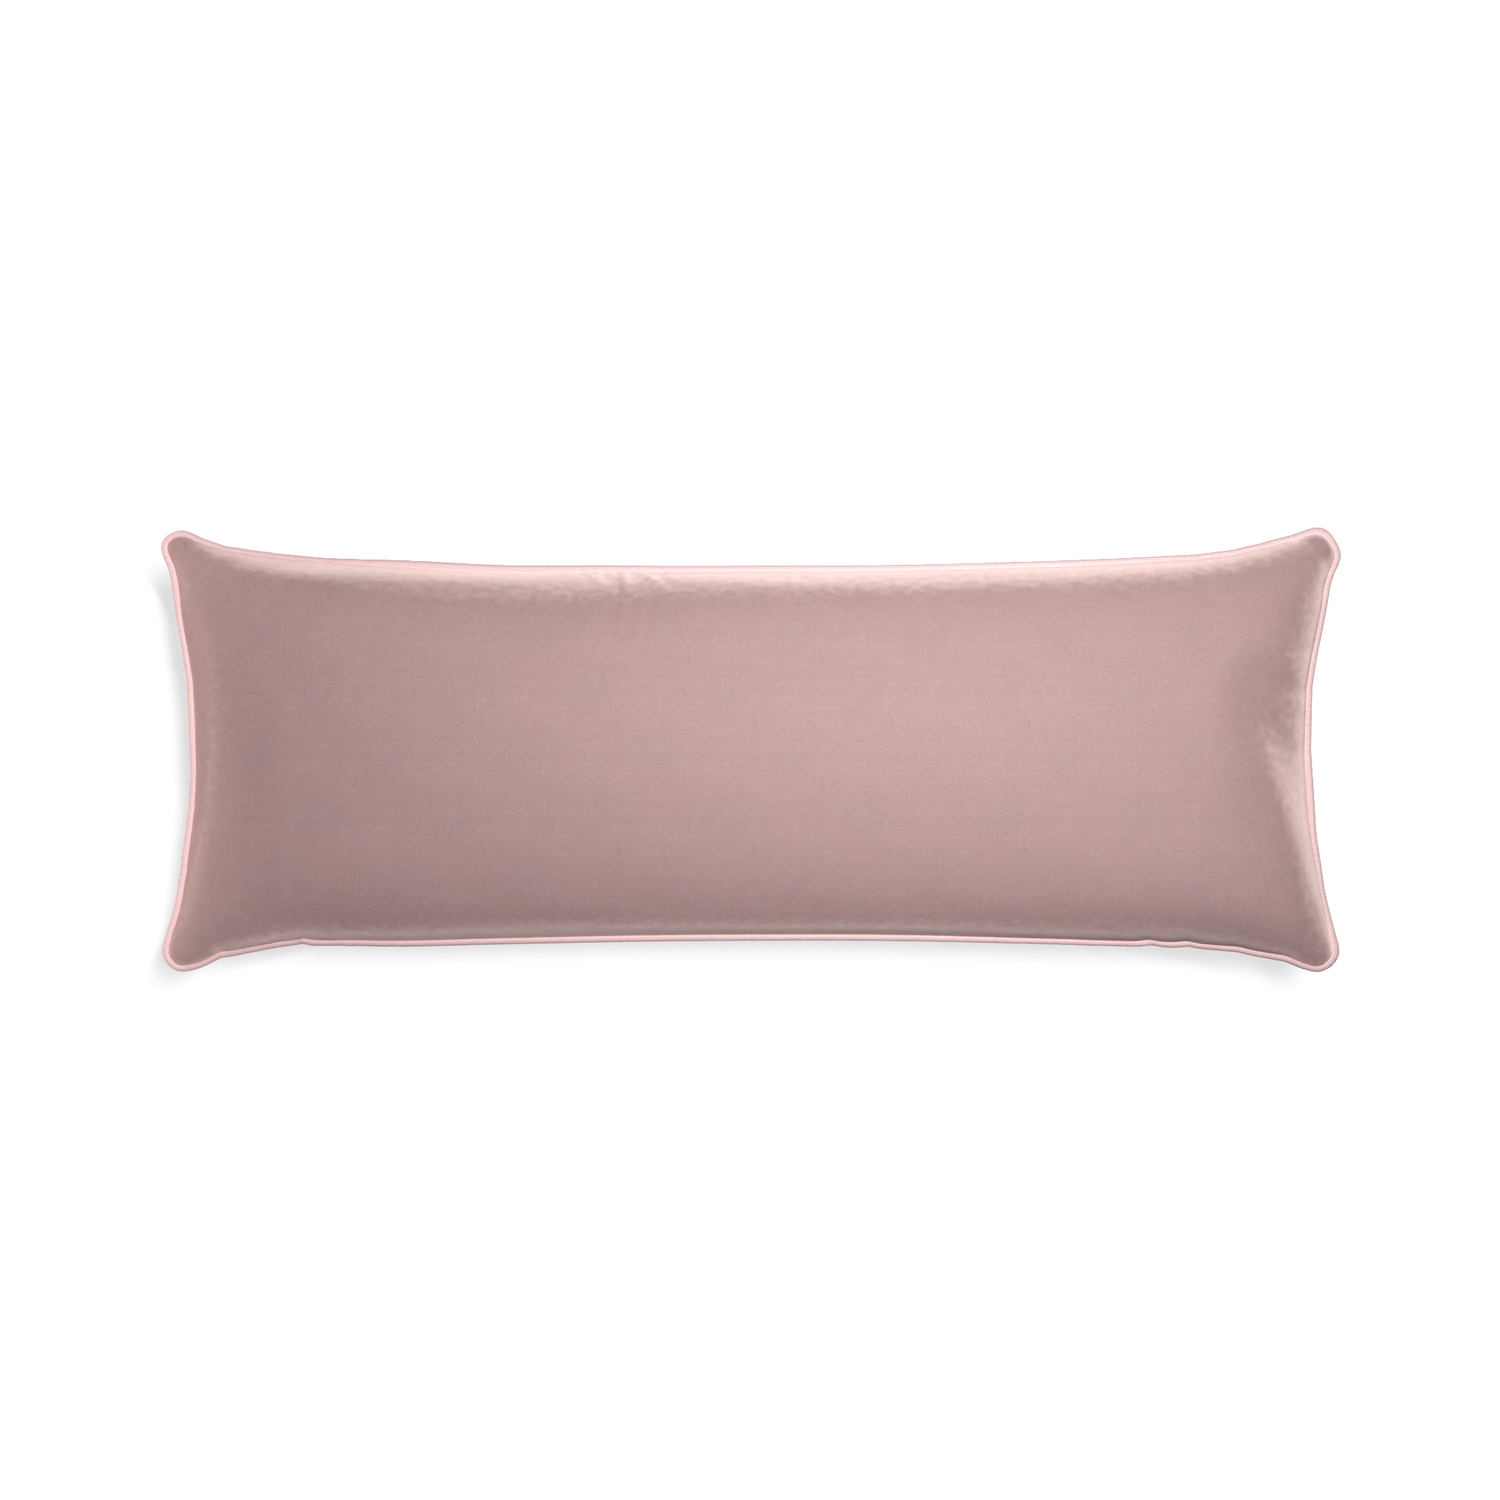 rectangle mauve velvet pillow with light pink piping